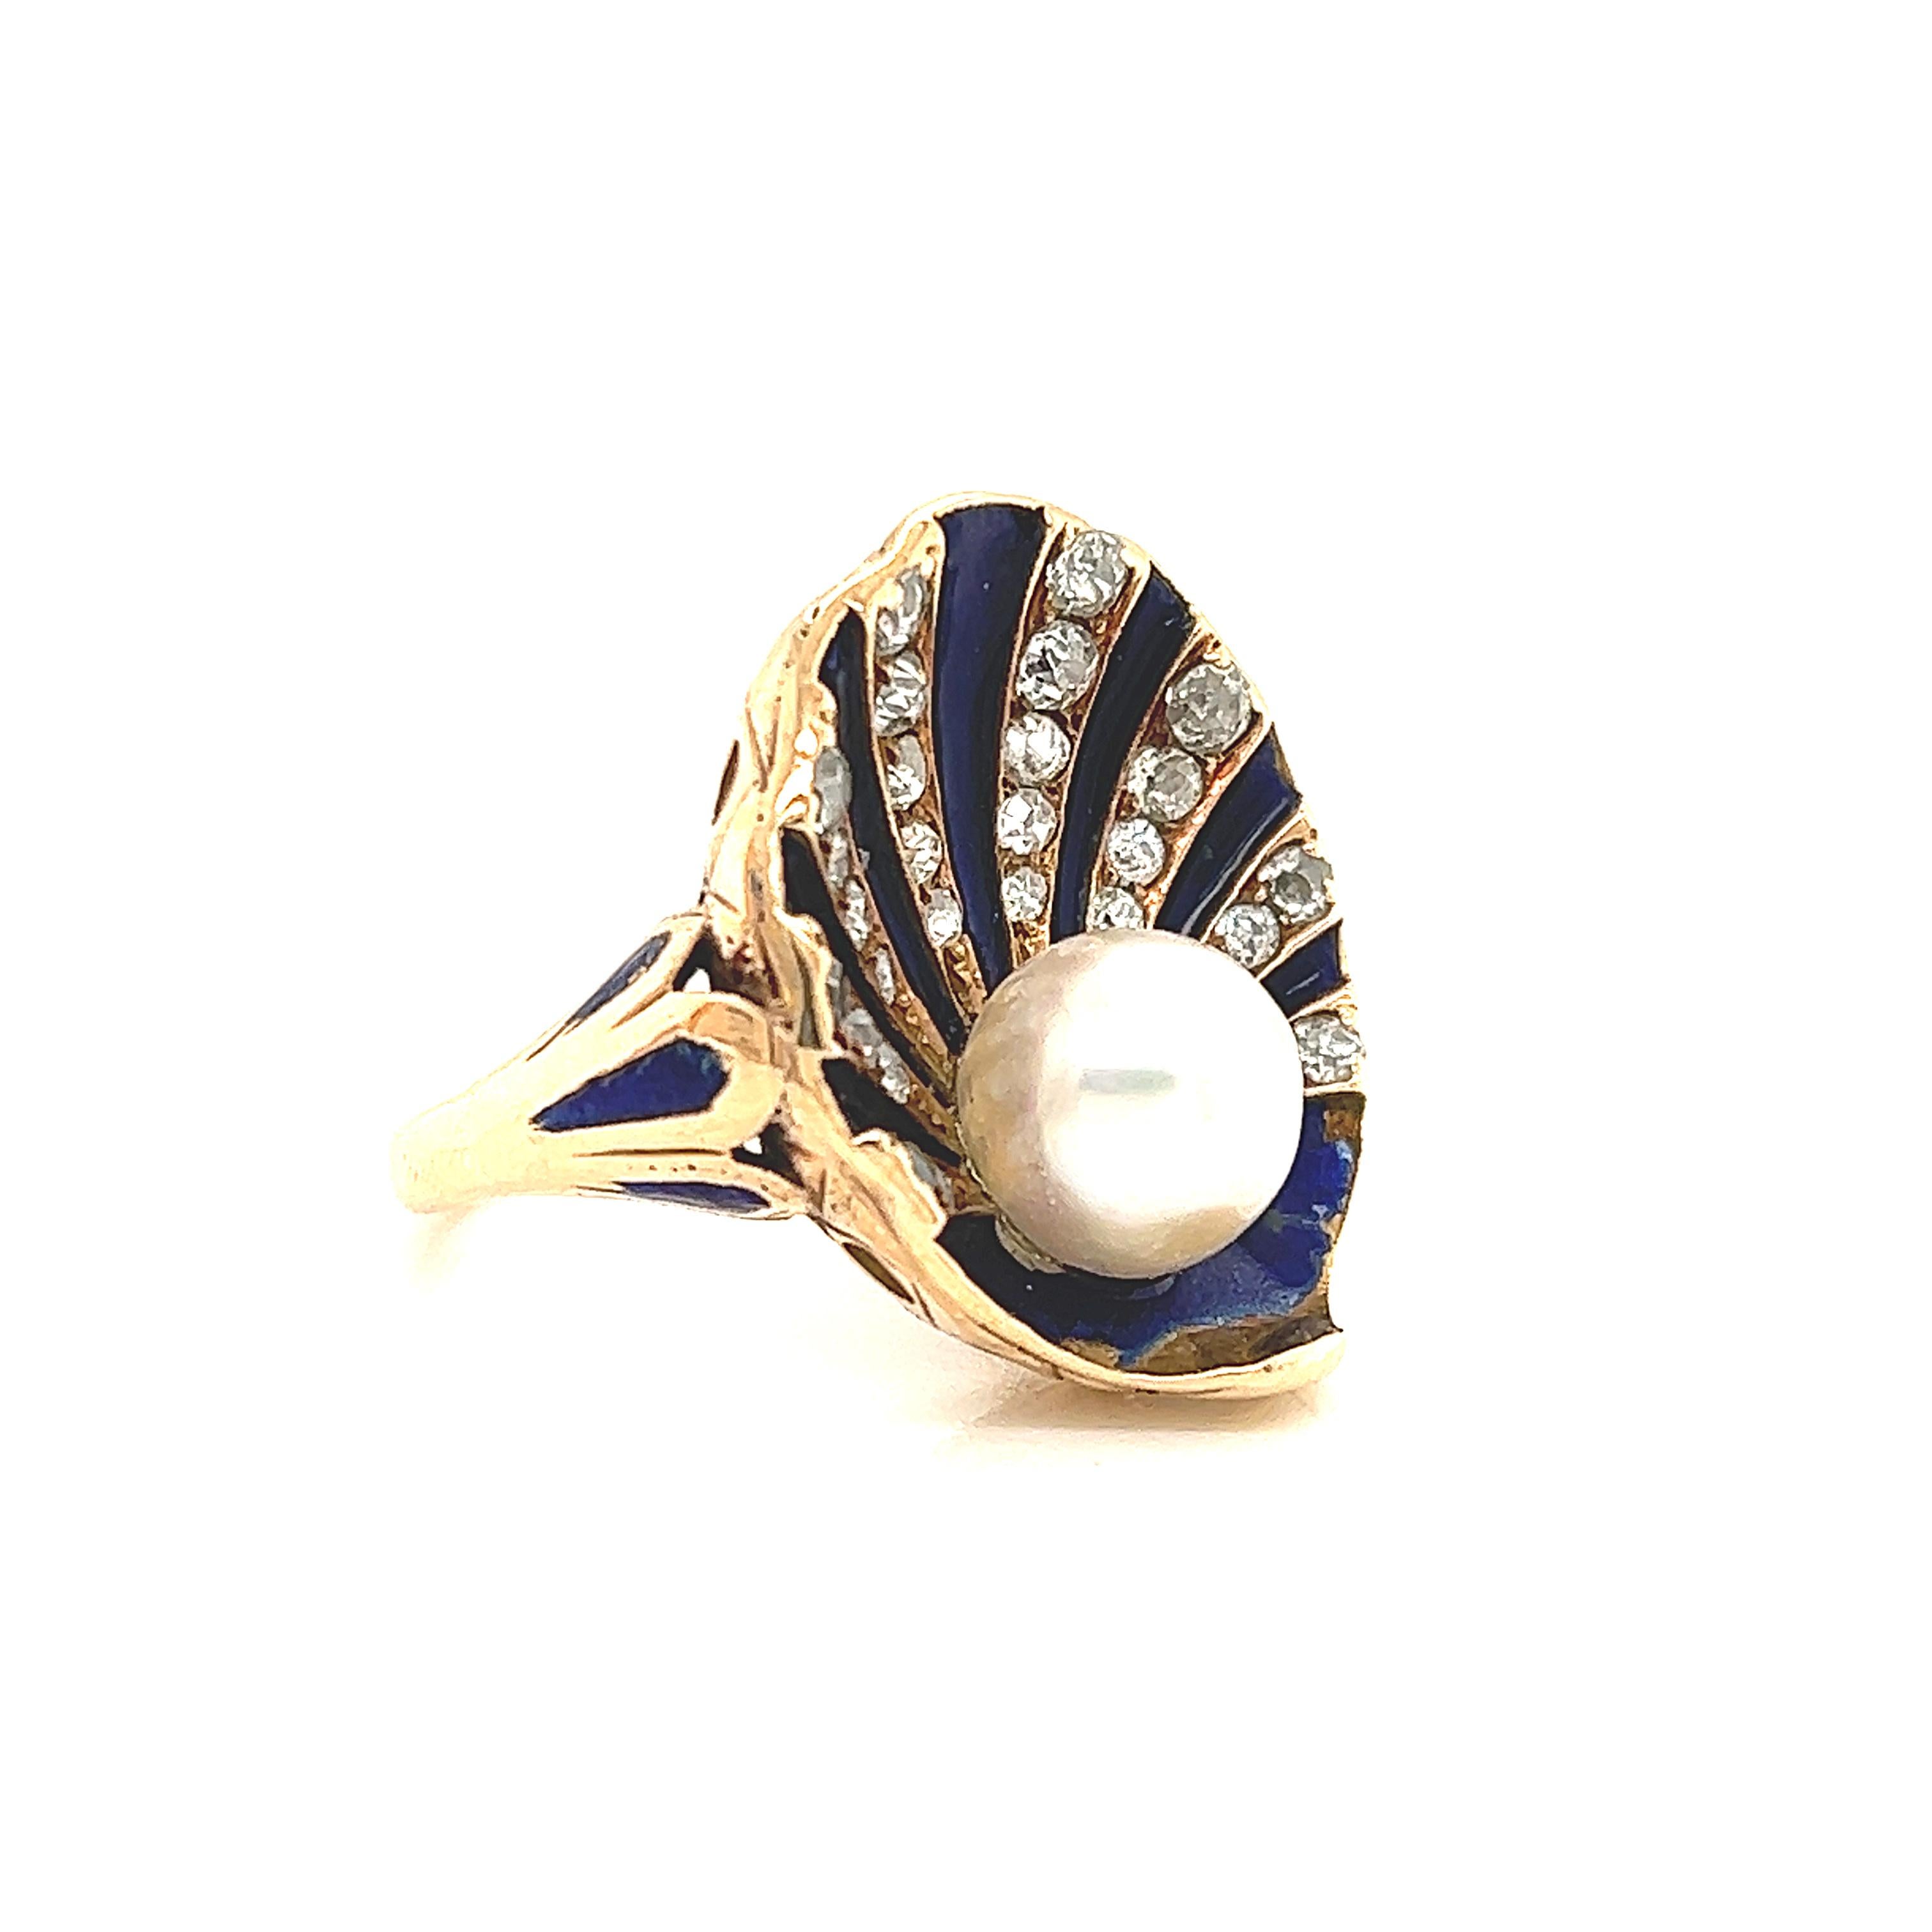 Gorgeous design seen on this vintage treasure. This Art Nouveau ring is crafted in the theme of an under water clam shell with details seen throughout. Highlighting this ring is a center round pearl with exceptional luster.  The ring is adorned with